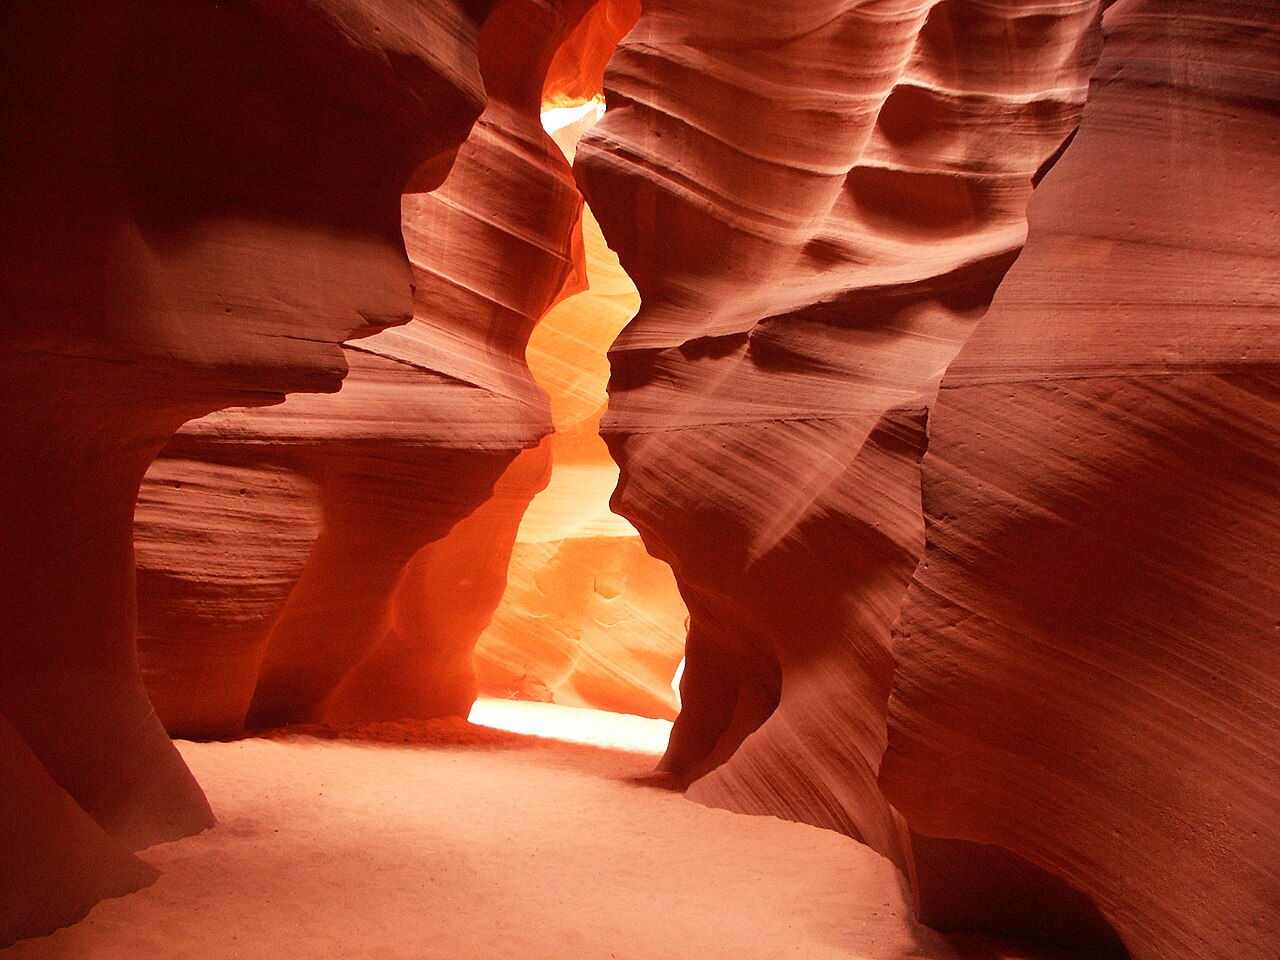 Lower Antelope Canyon offers a more challenging but equally rewarding experience. Accessible via metal stairways, it features spiraling rock arches and narrow corridors winding their way through the sandstone. Despite its more rugged terrain, Lower Antelope Canyon attracts photographers and adventurers eager to capture its natural beauty.